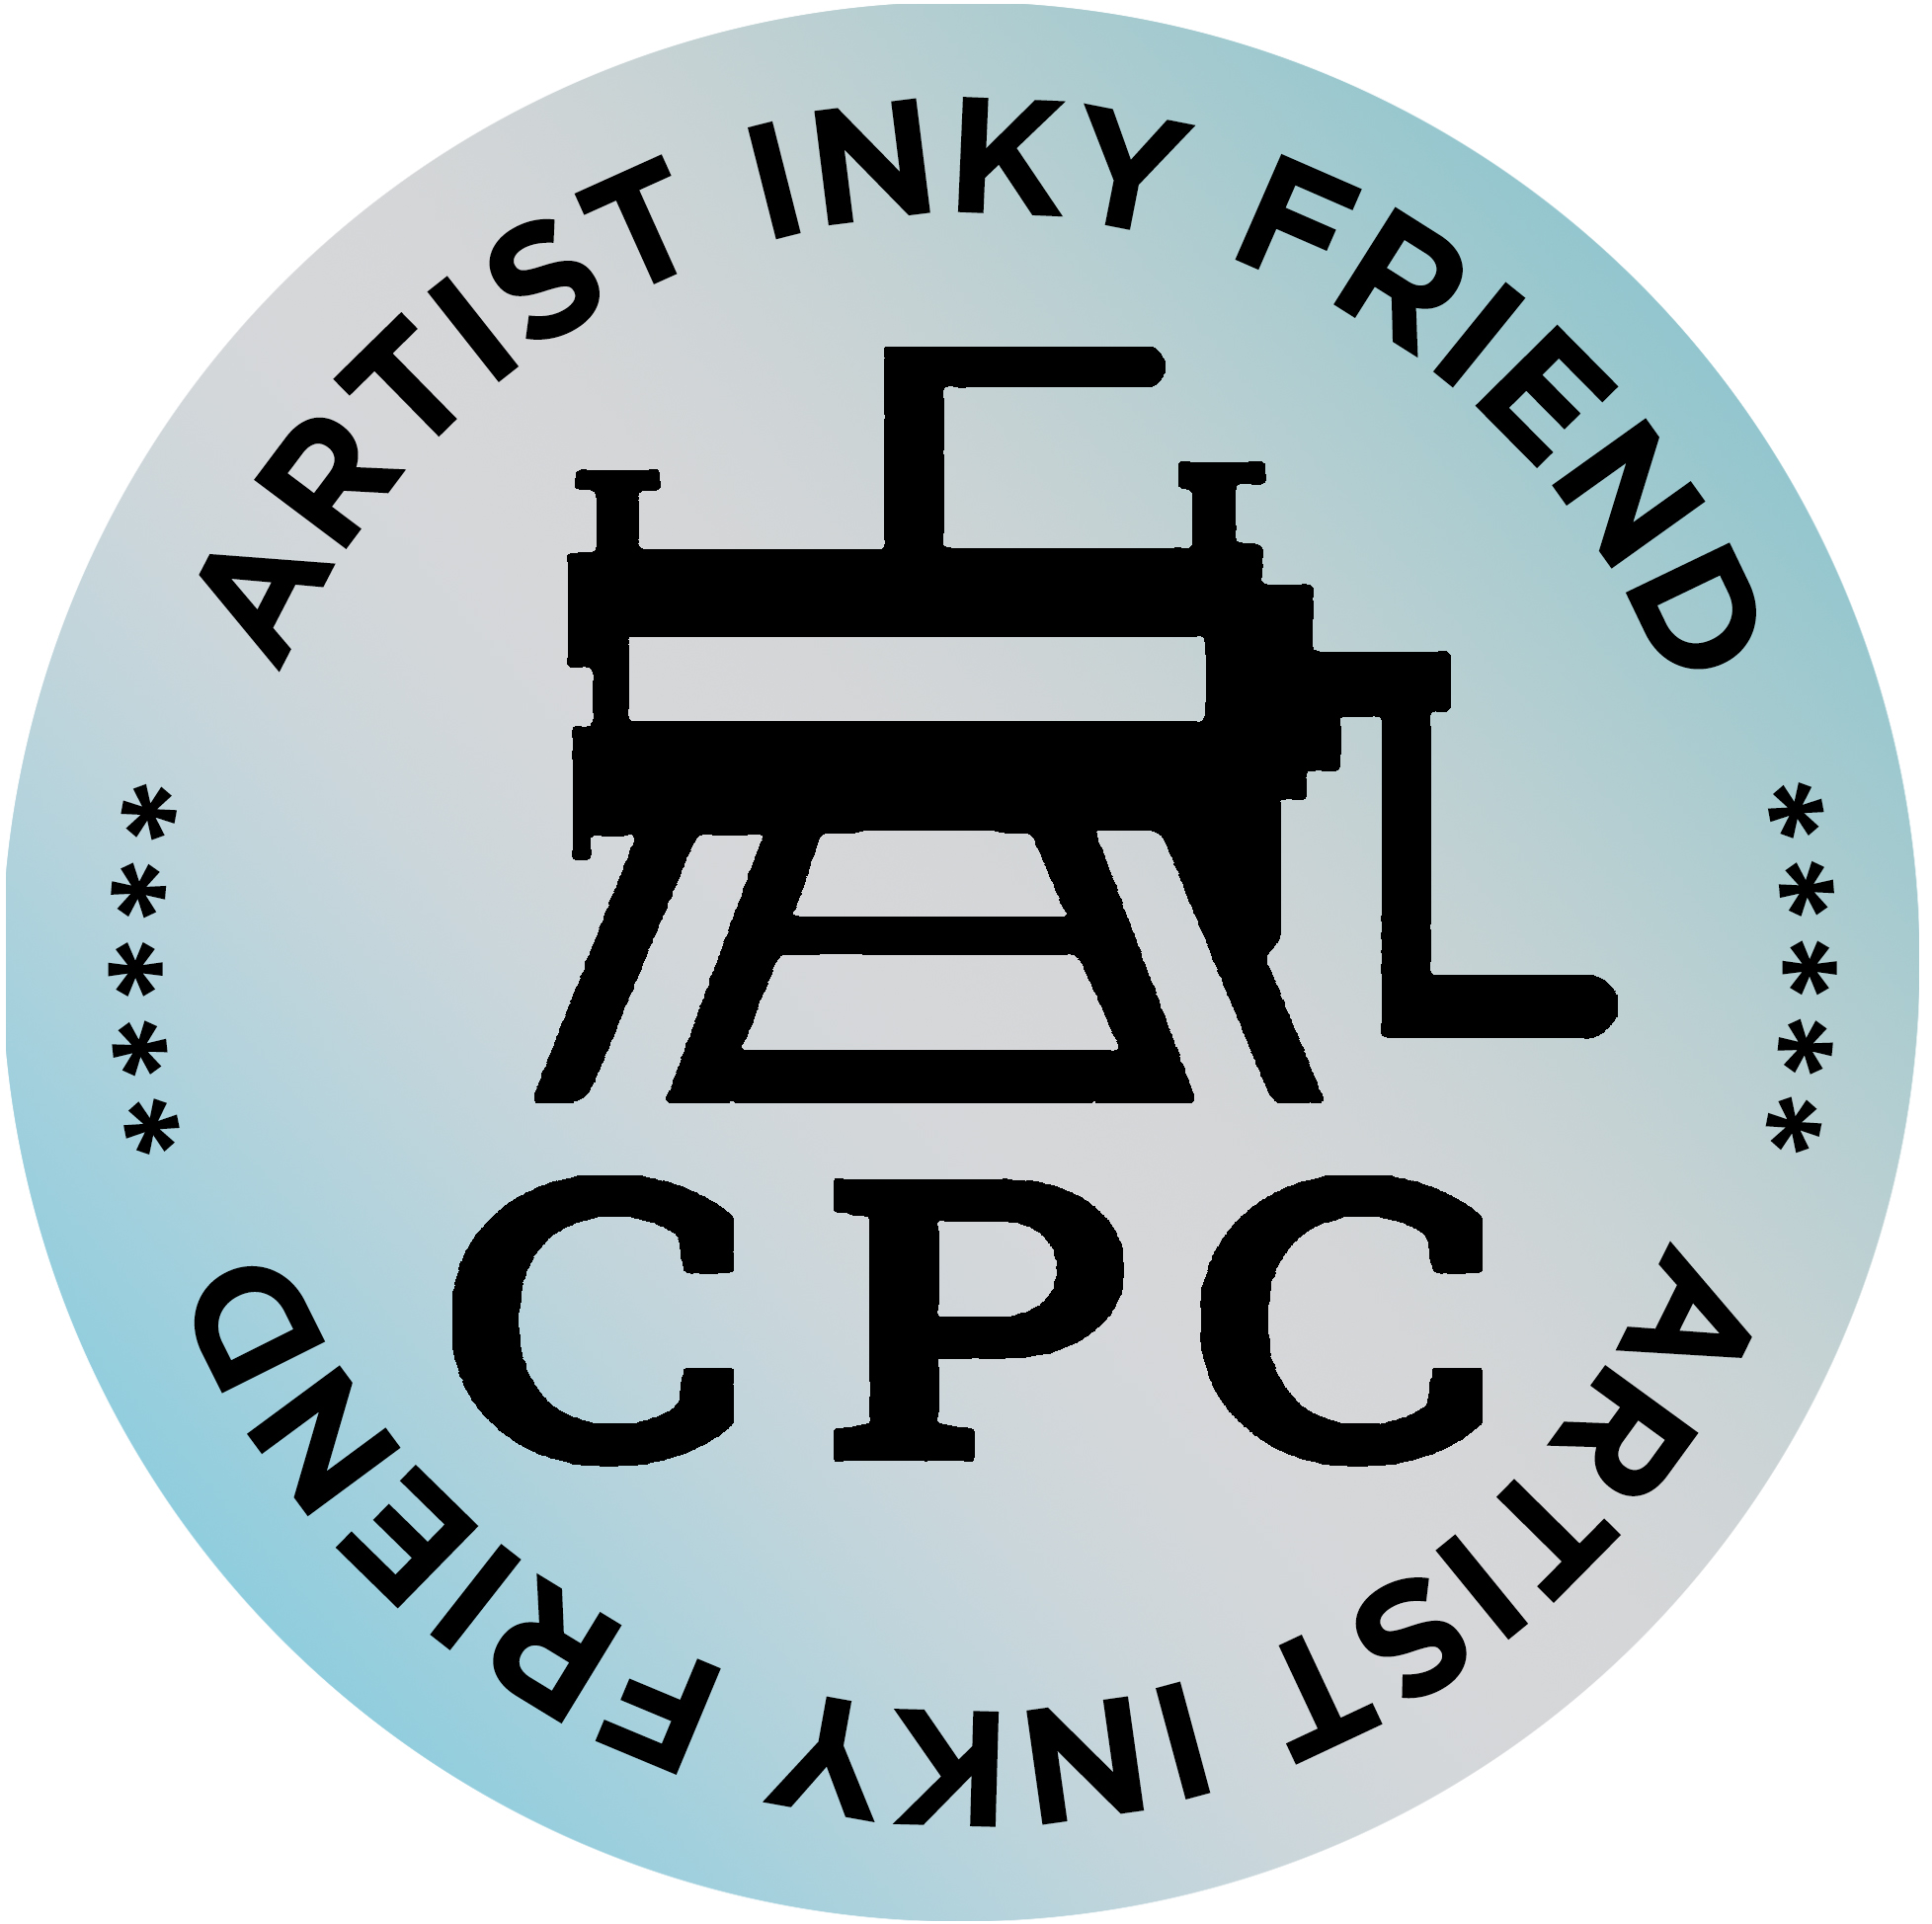 ARTIST INKY FRIEND – $100+/year — Join now!